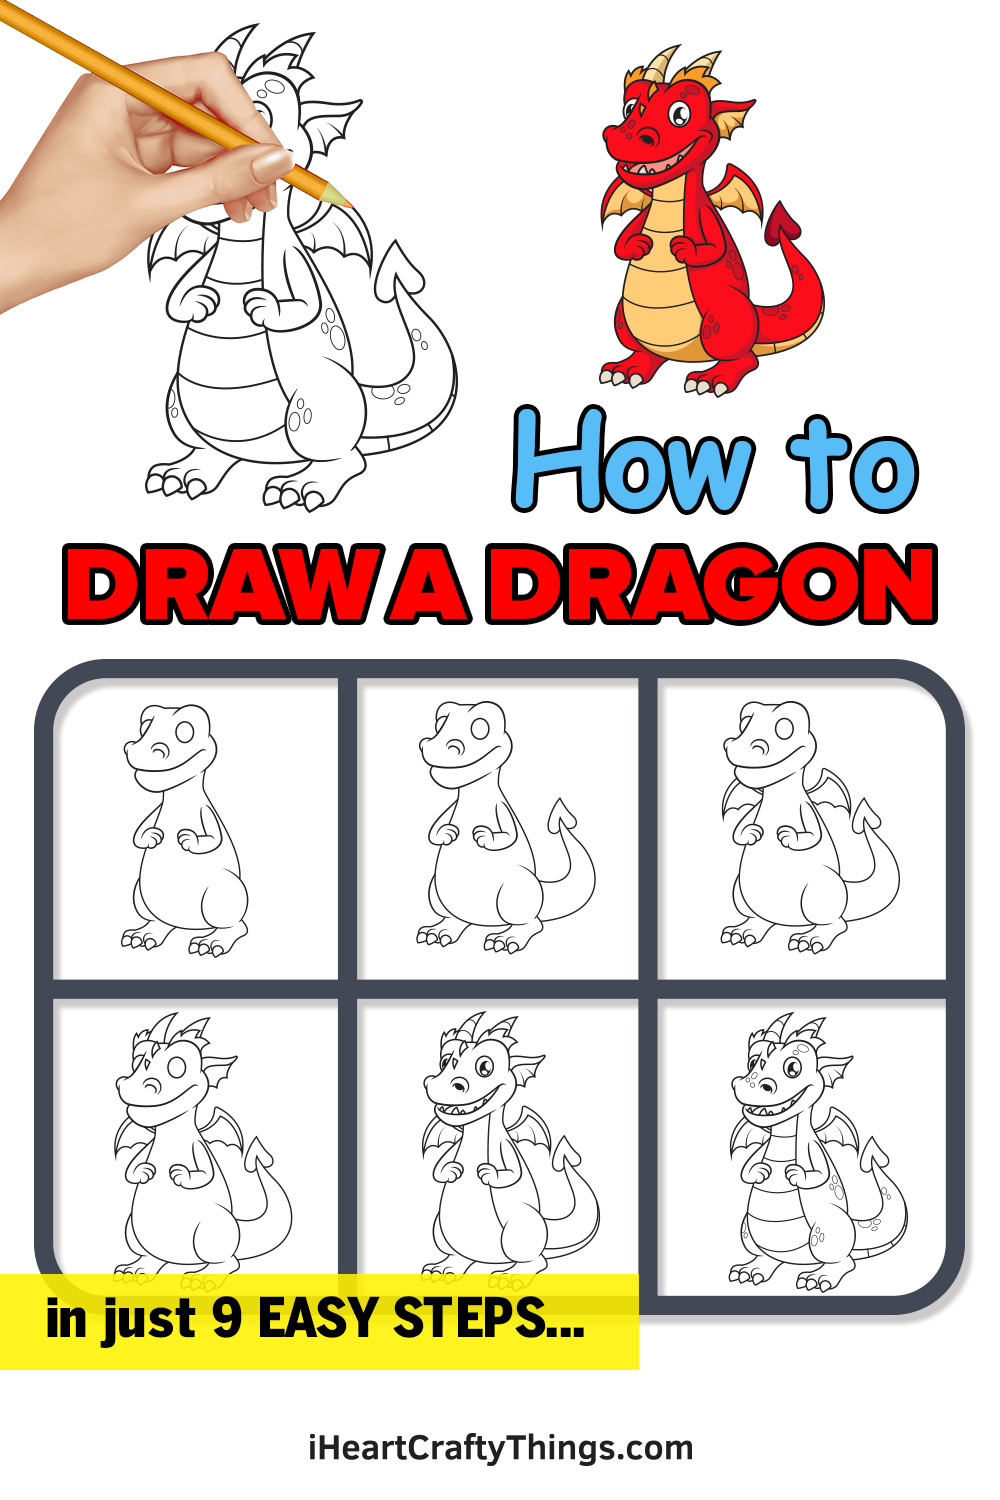 How to Draw a Dragon in 9 Easy Steps